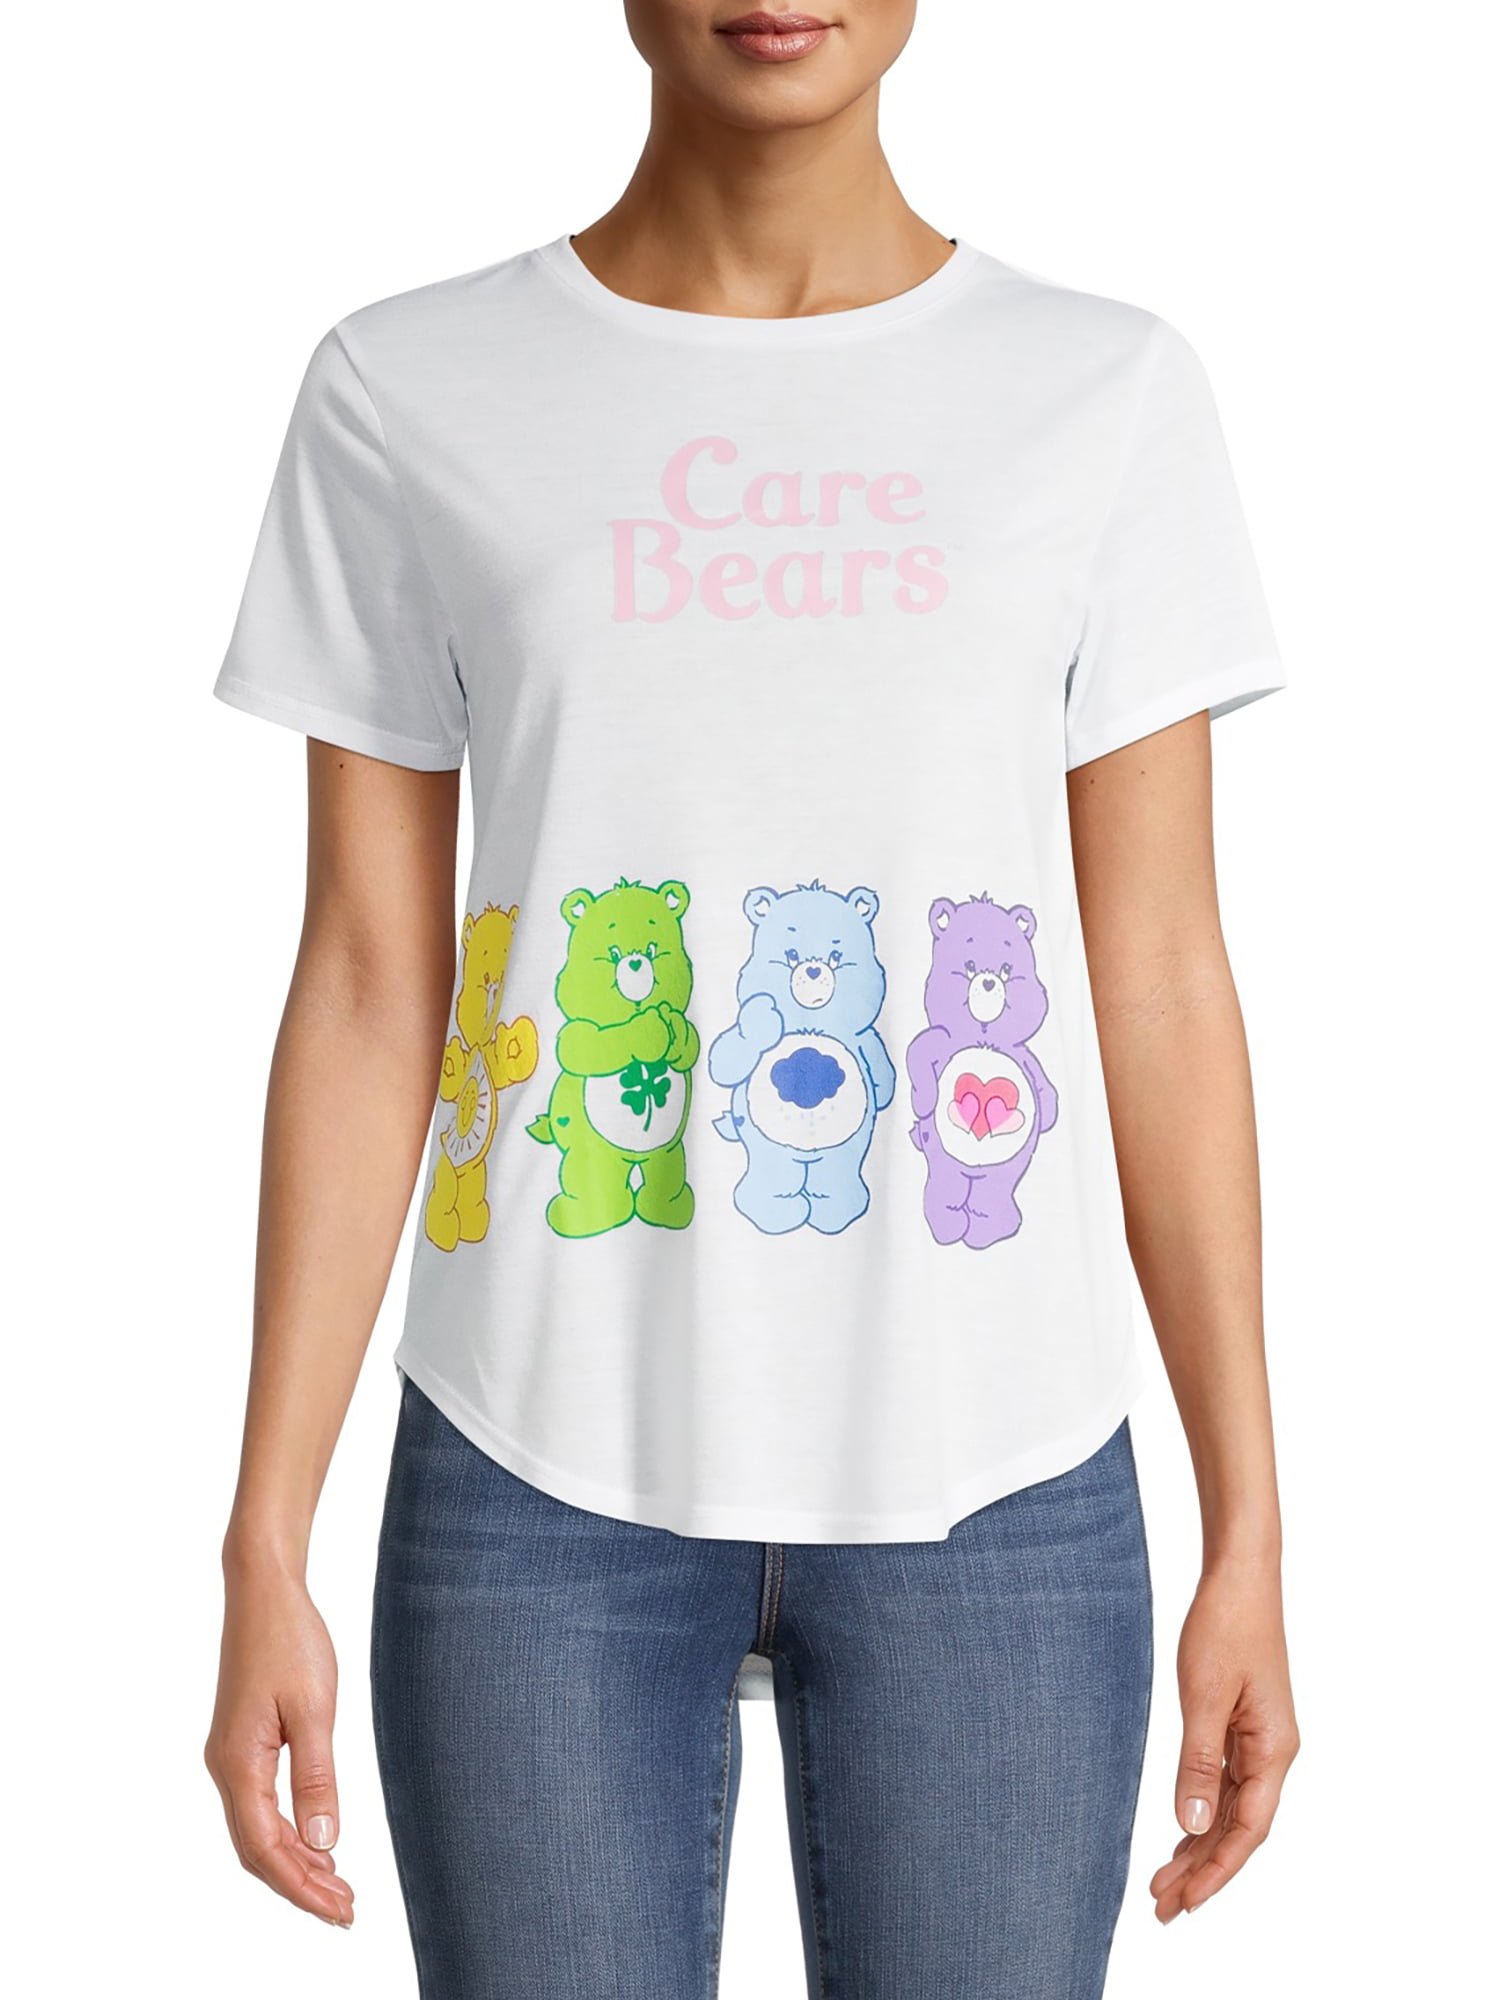 Apple Basket and Bears  Denim and Tshirt  Sizes/Colors